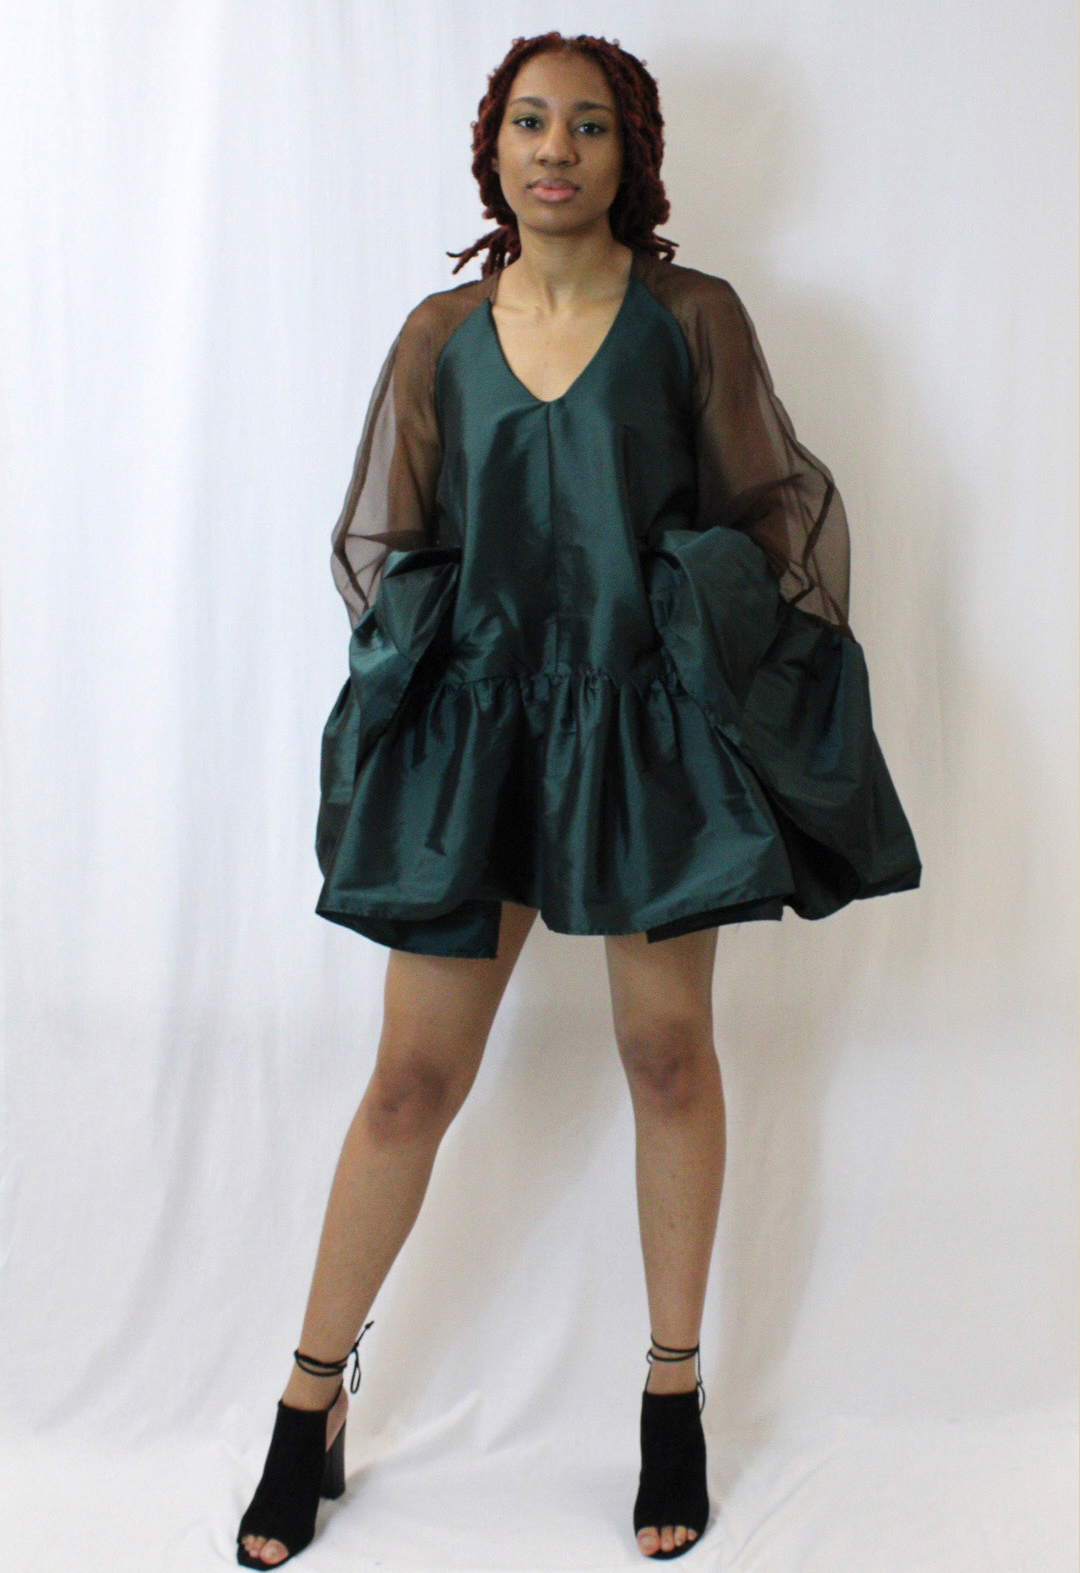 The images shows a voluminous tent dress with ruffles continuously around the body and sleeve hem. 